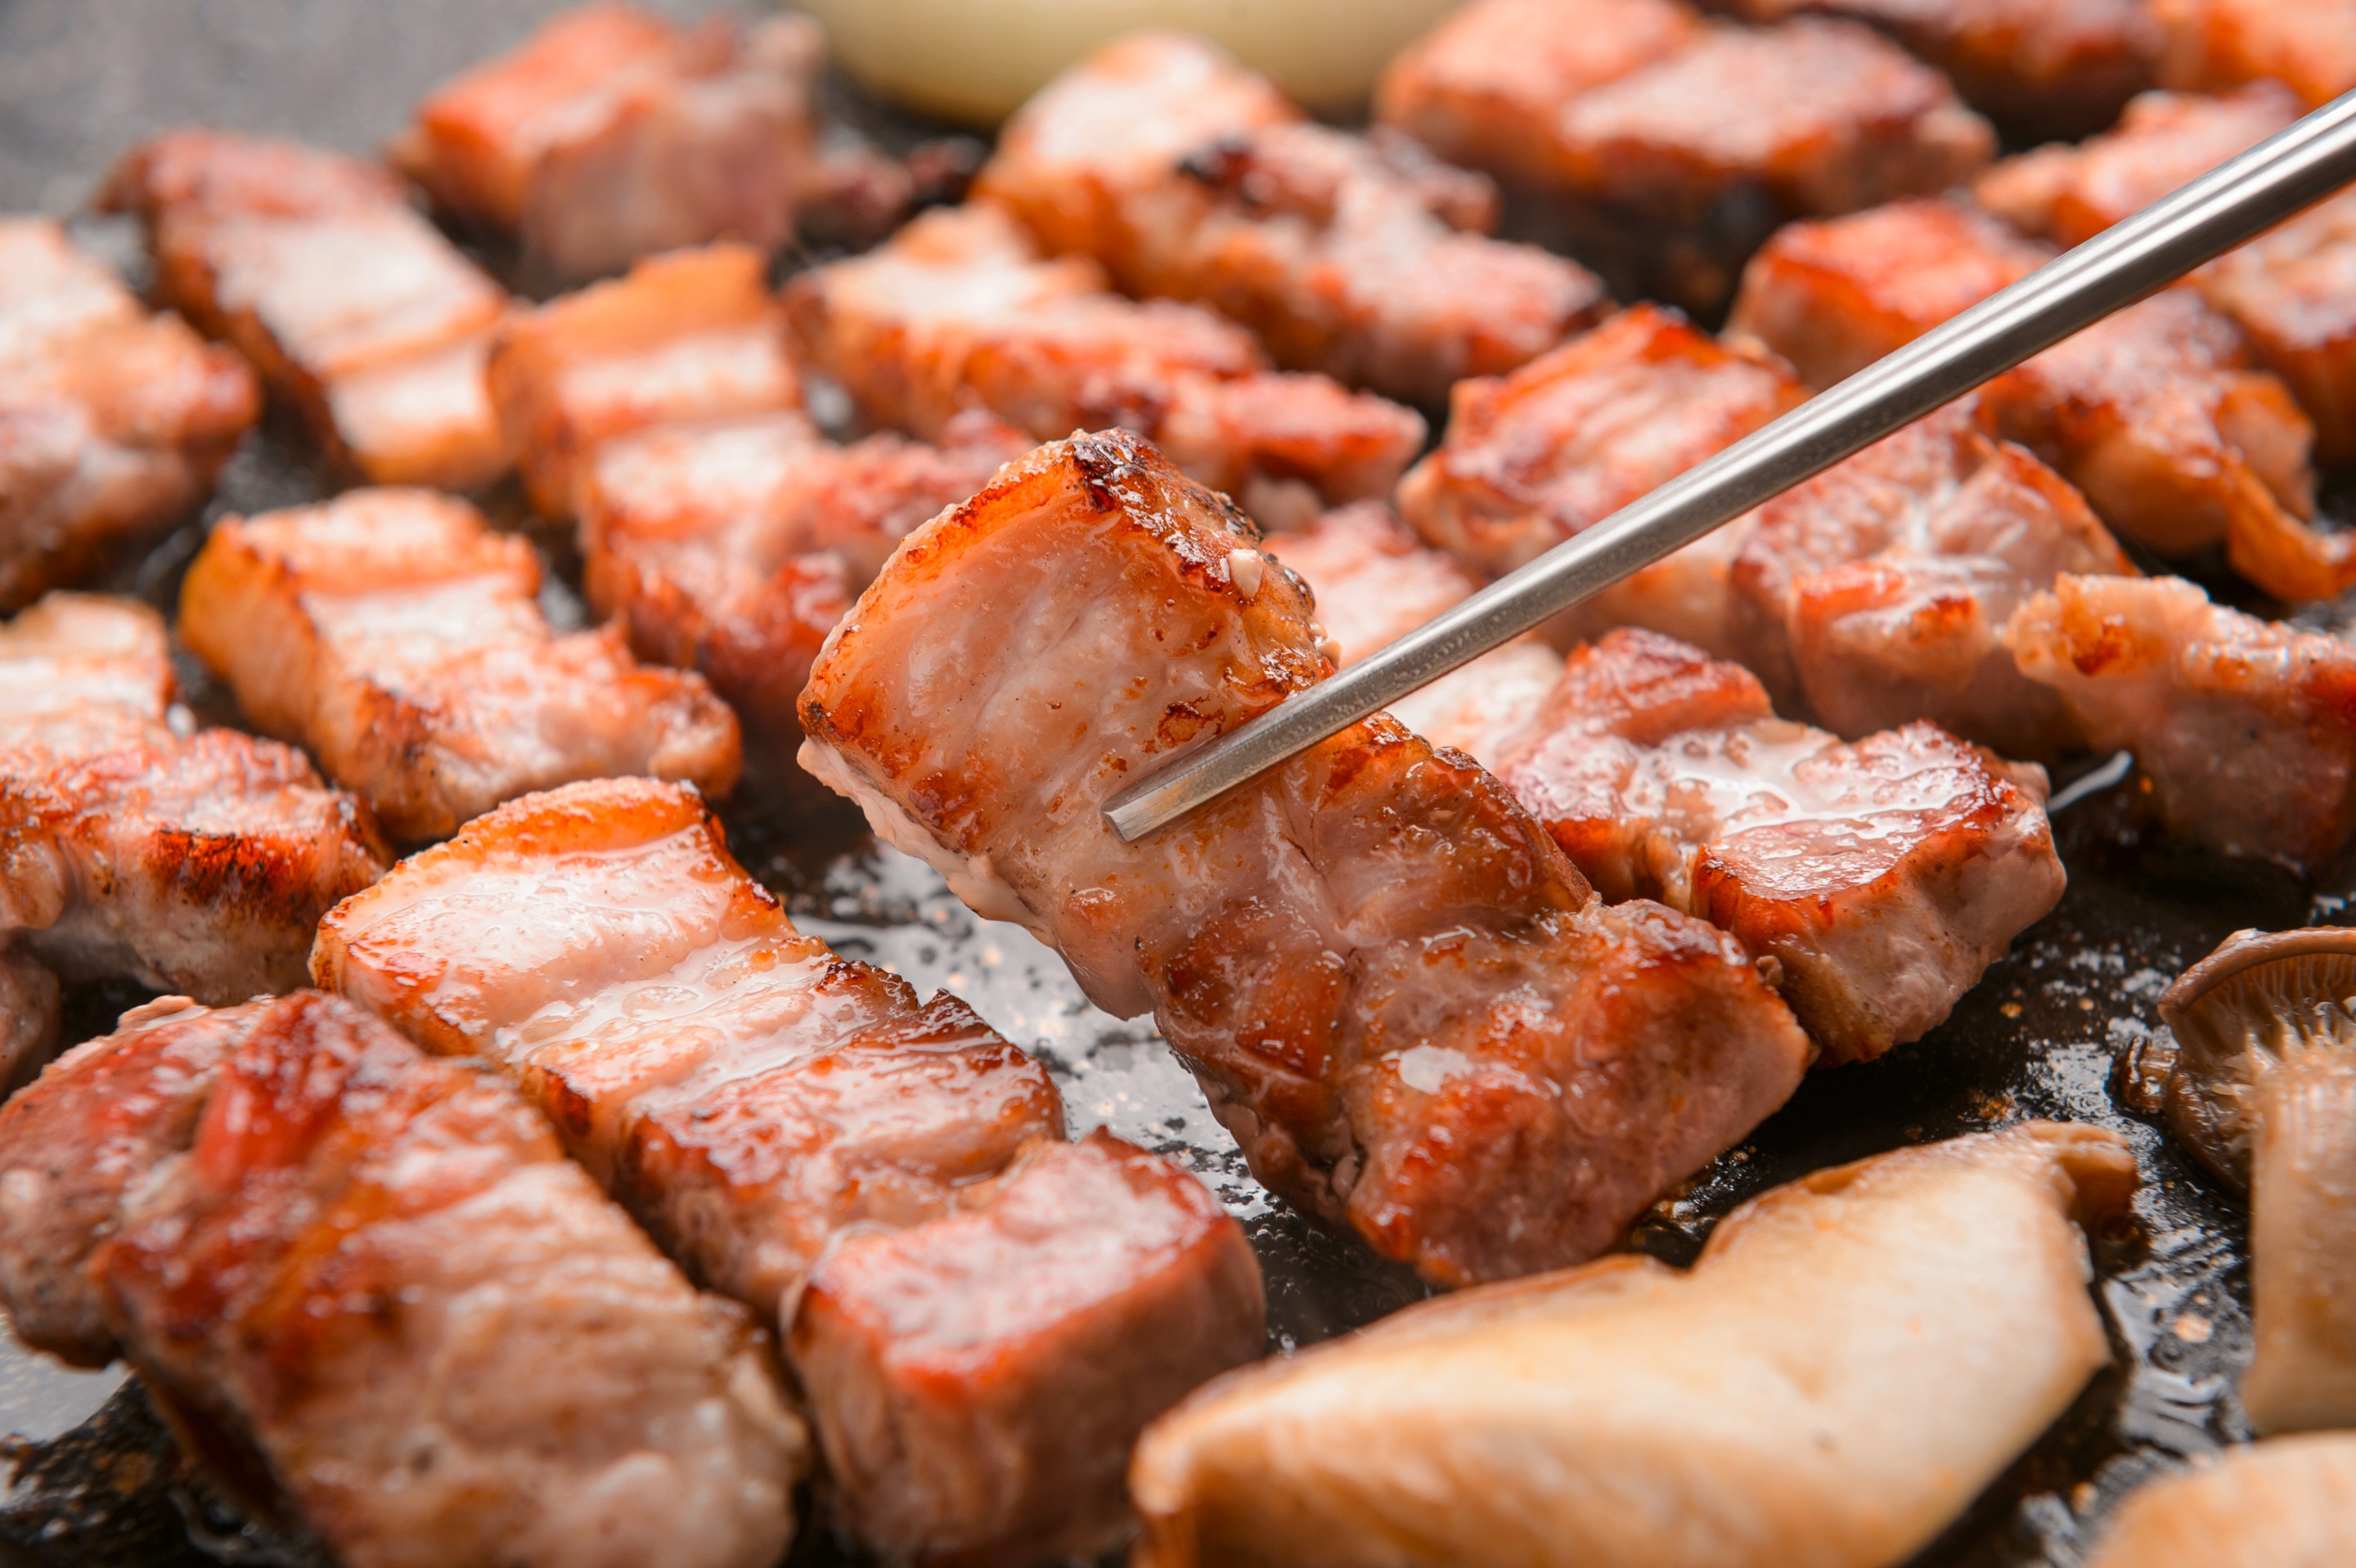 Slices of cooked Korean pork belly on a stovetop grill